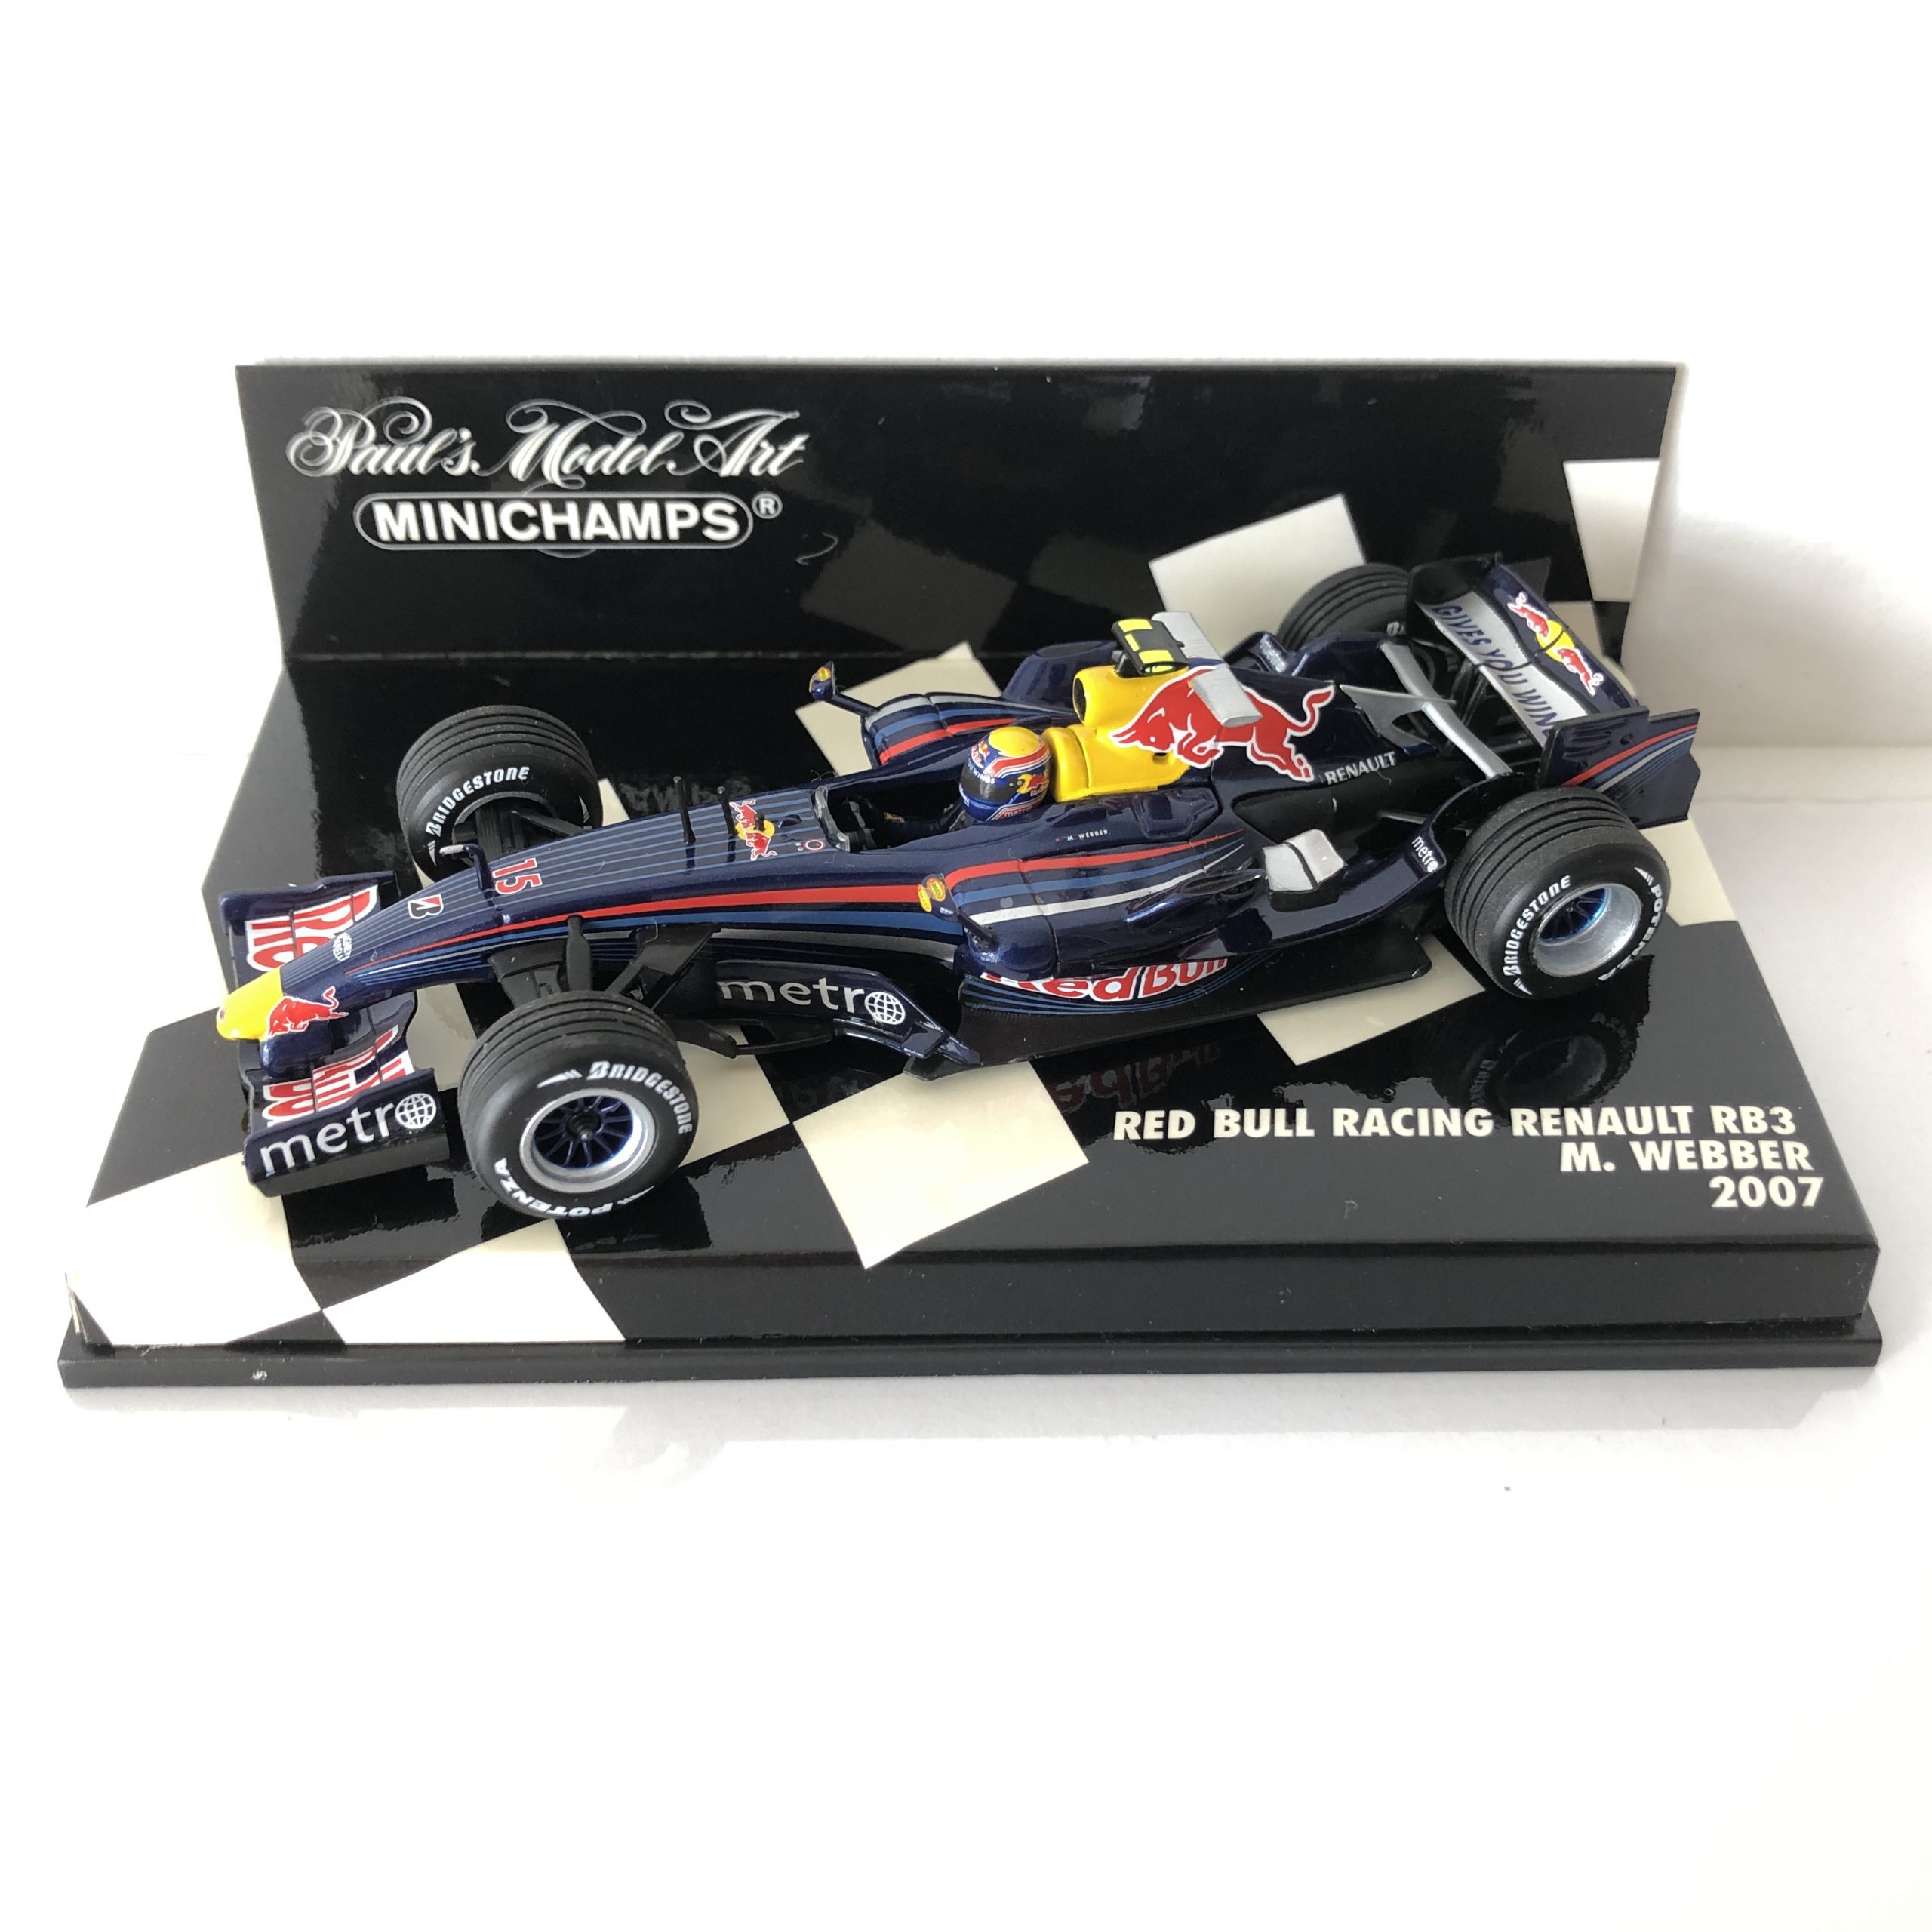 2007 Mark Webber Red Bull Racing RB3 Minichamps Diecast Scale | CLASSICTRAX.CO.UK